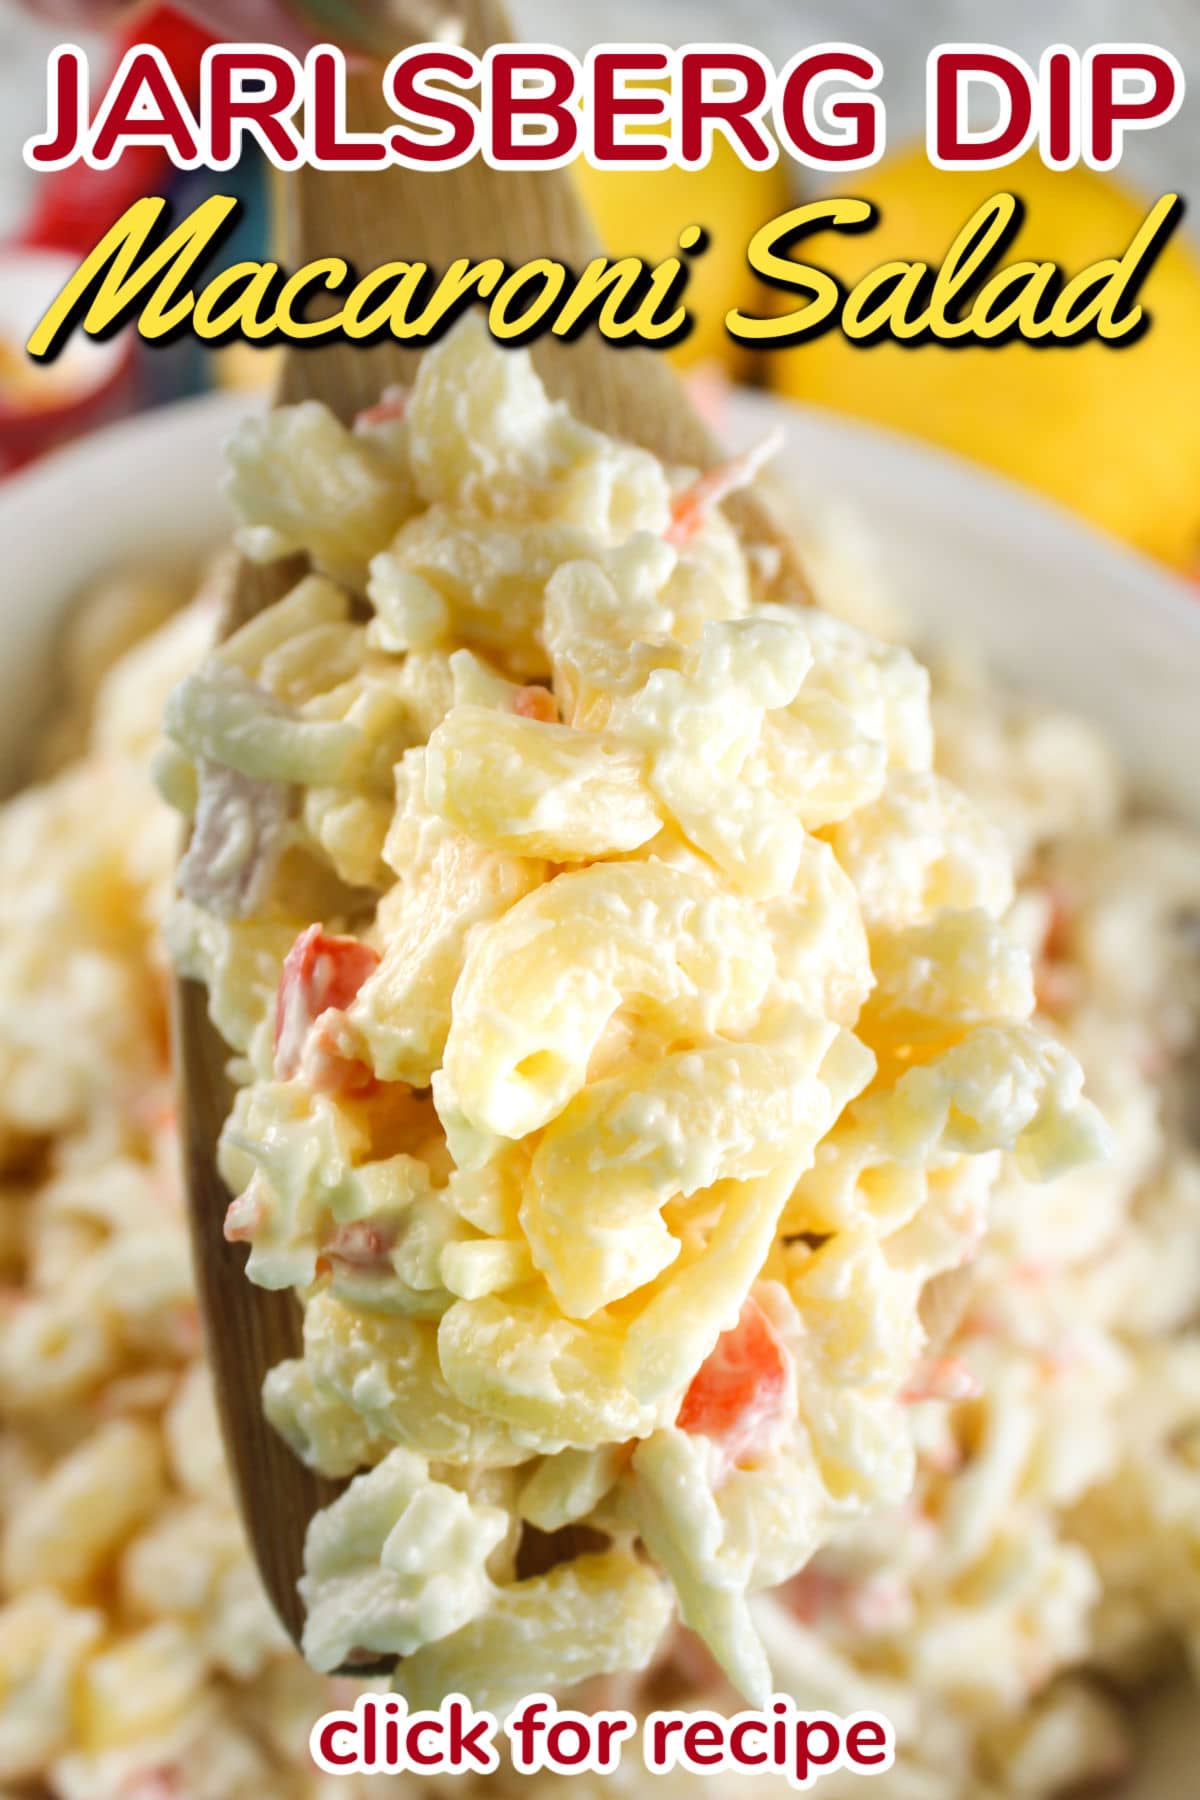 With the holidays fast approaching, quick and easy side dishes are always needed! This Jarlsberg Dip Macaroni Salad is going to be a sure fire hit at your dinner table! Plus it's SO SIMPLE to make! via @foodhussy